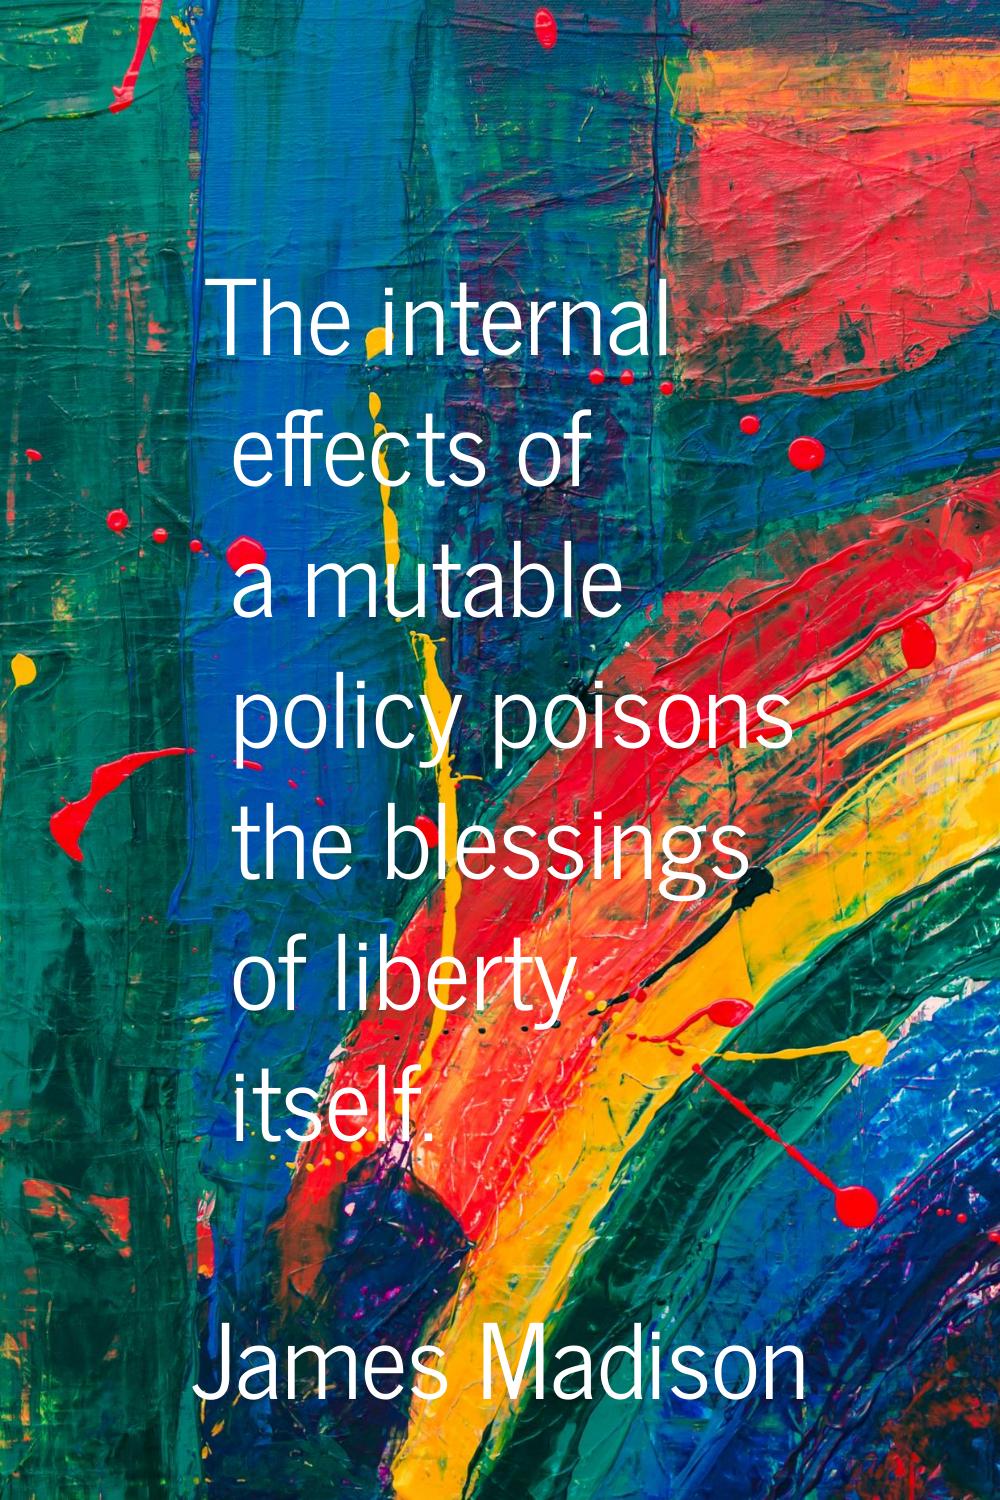 The internal effects of a mutable policy poisons the blessings of liberty itself.